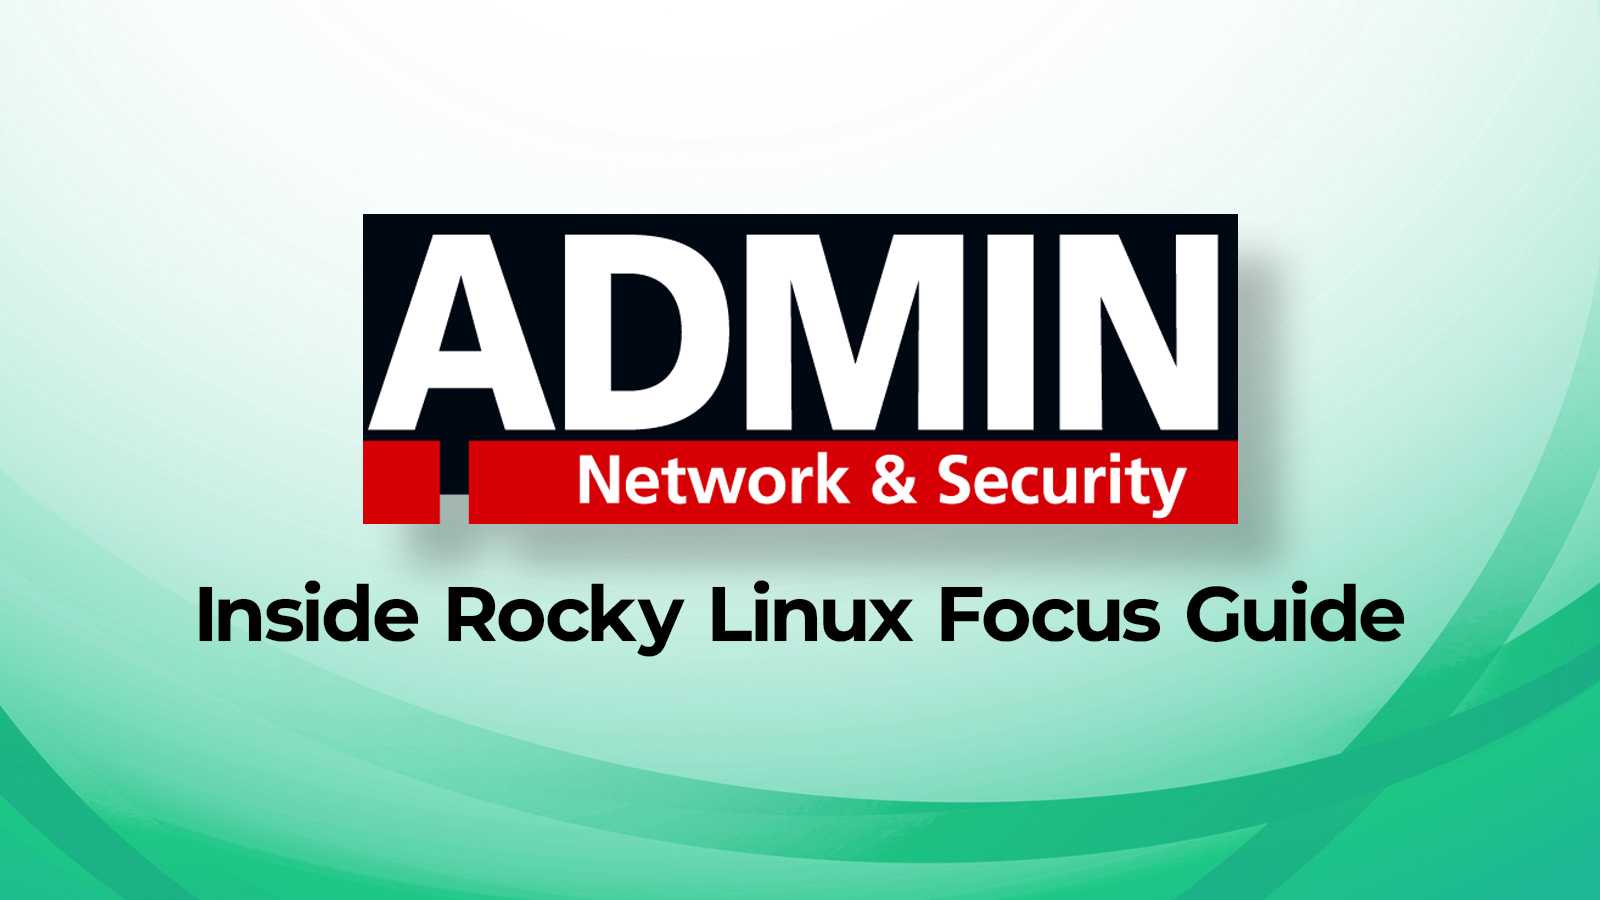 Inside Rocky Linux Focus Guide Now Available